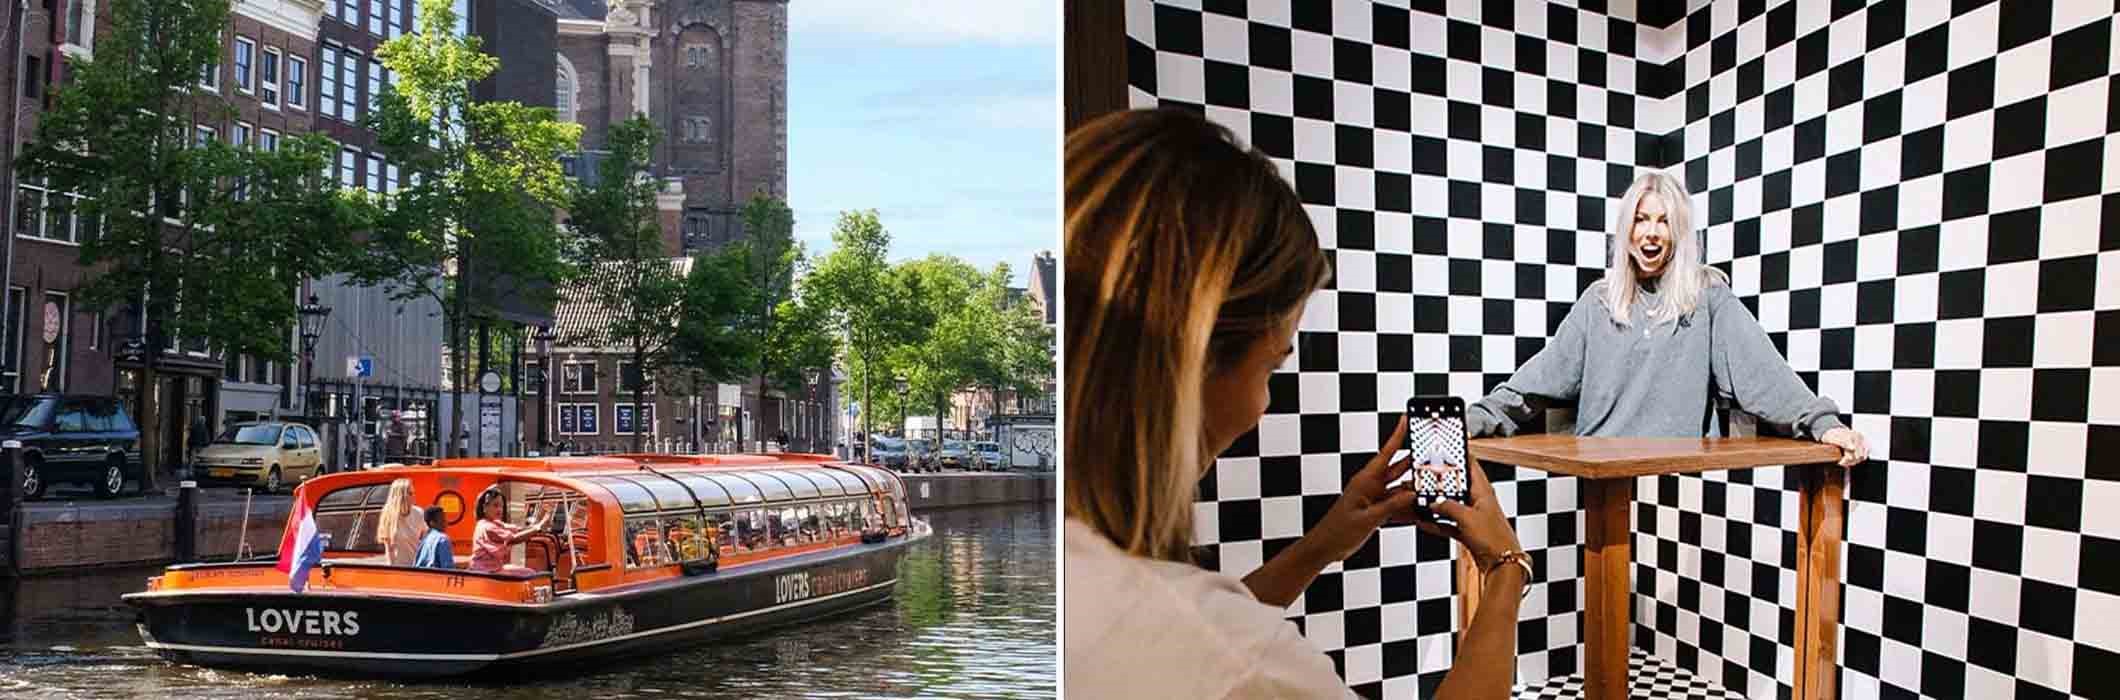 Ripley’s Believe it or Not + Amsterdam Canal Cruise